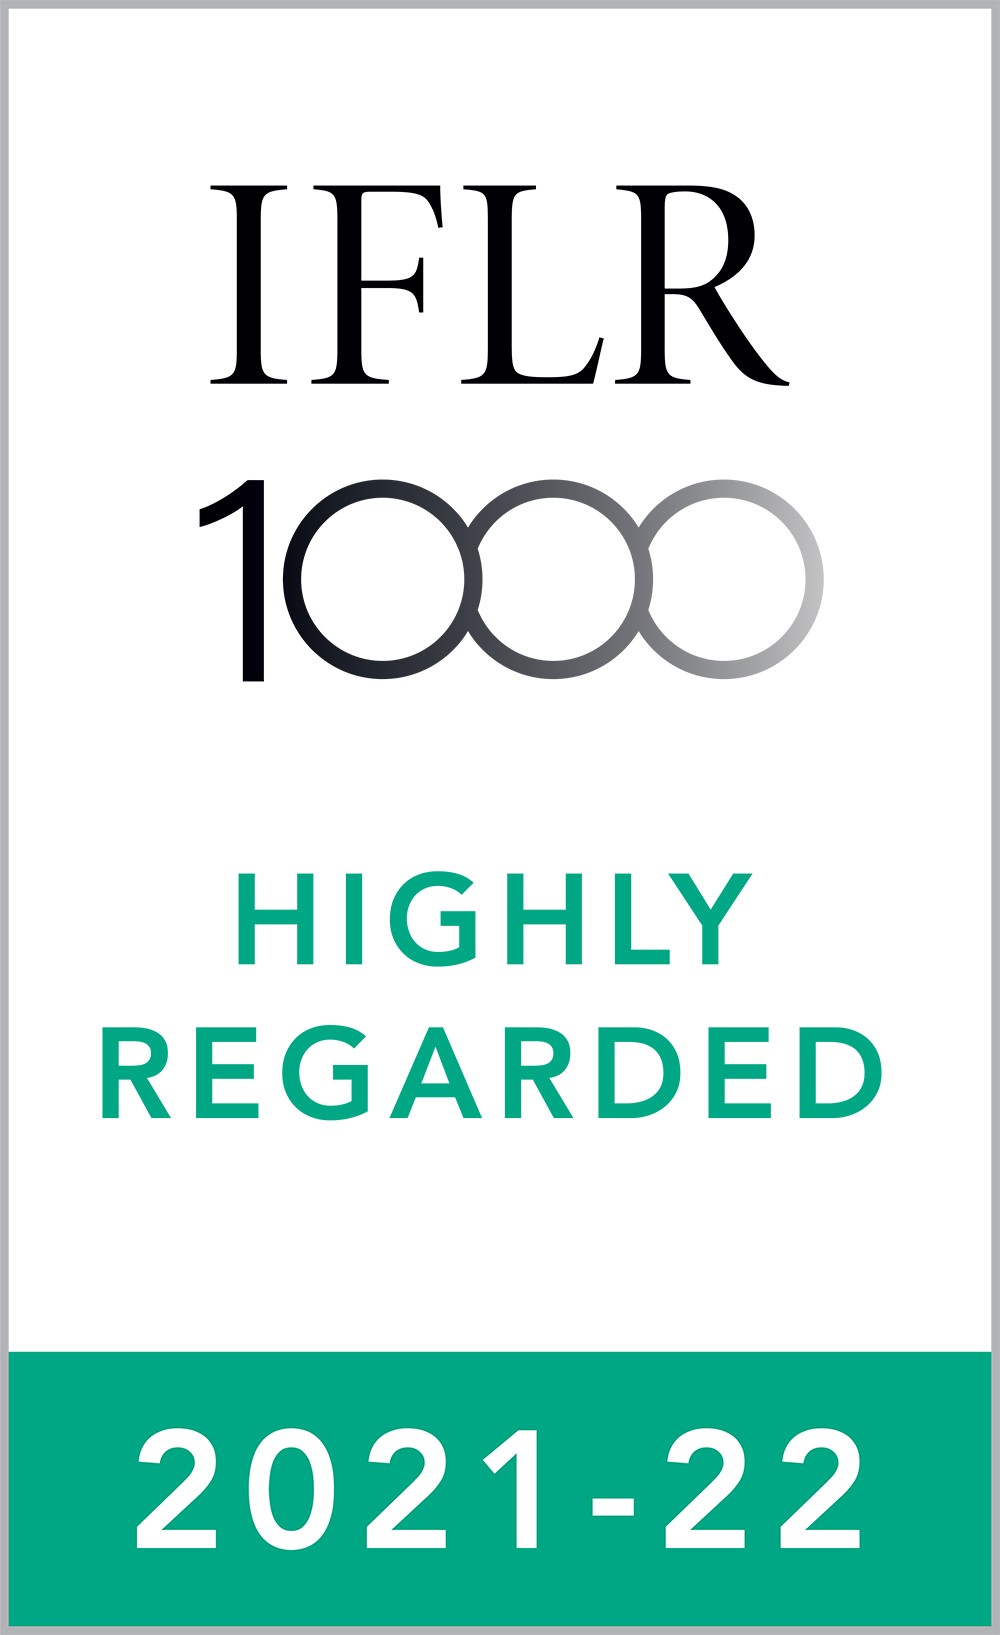 Highly Regarded Leading Lawyer in Capital markets: Equity, M&A, Private equity and Restructuring and insolvency practices by IFLR1000, 2021-22